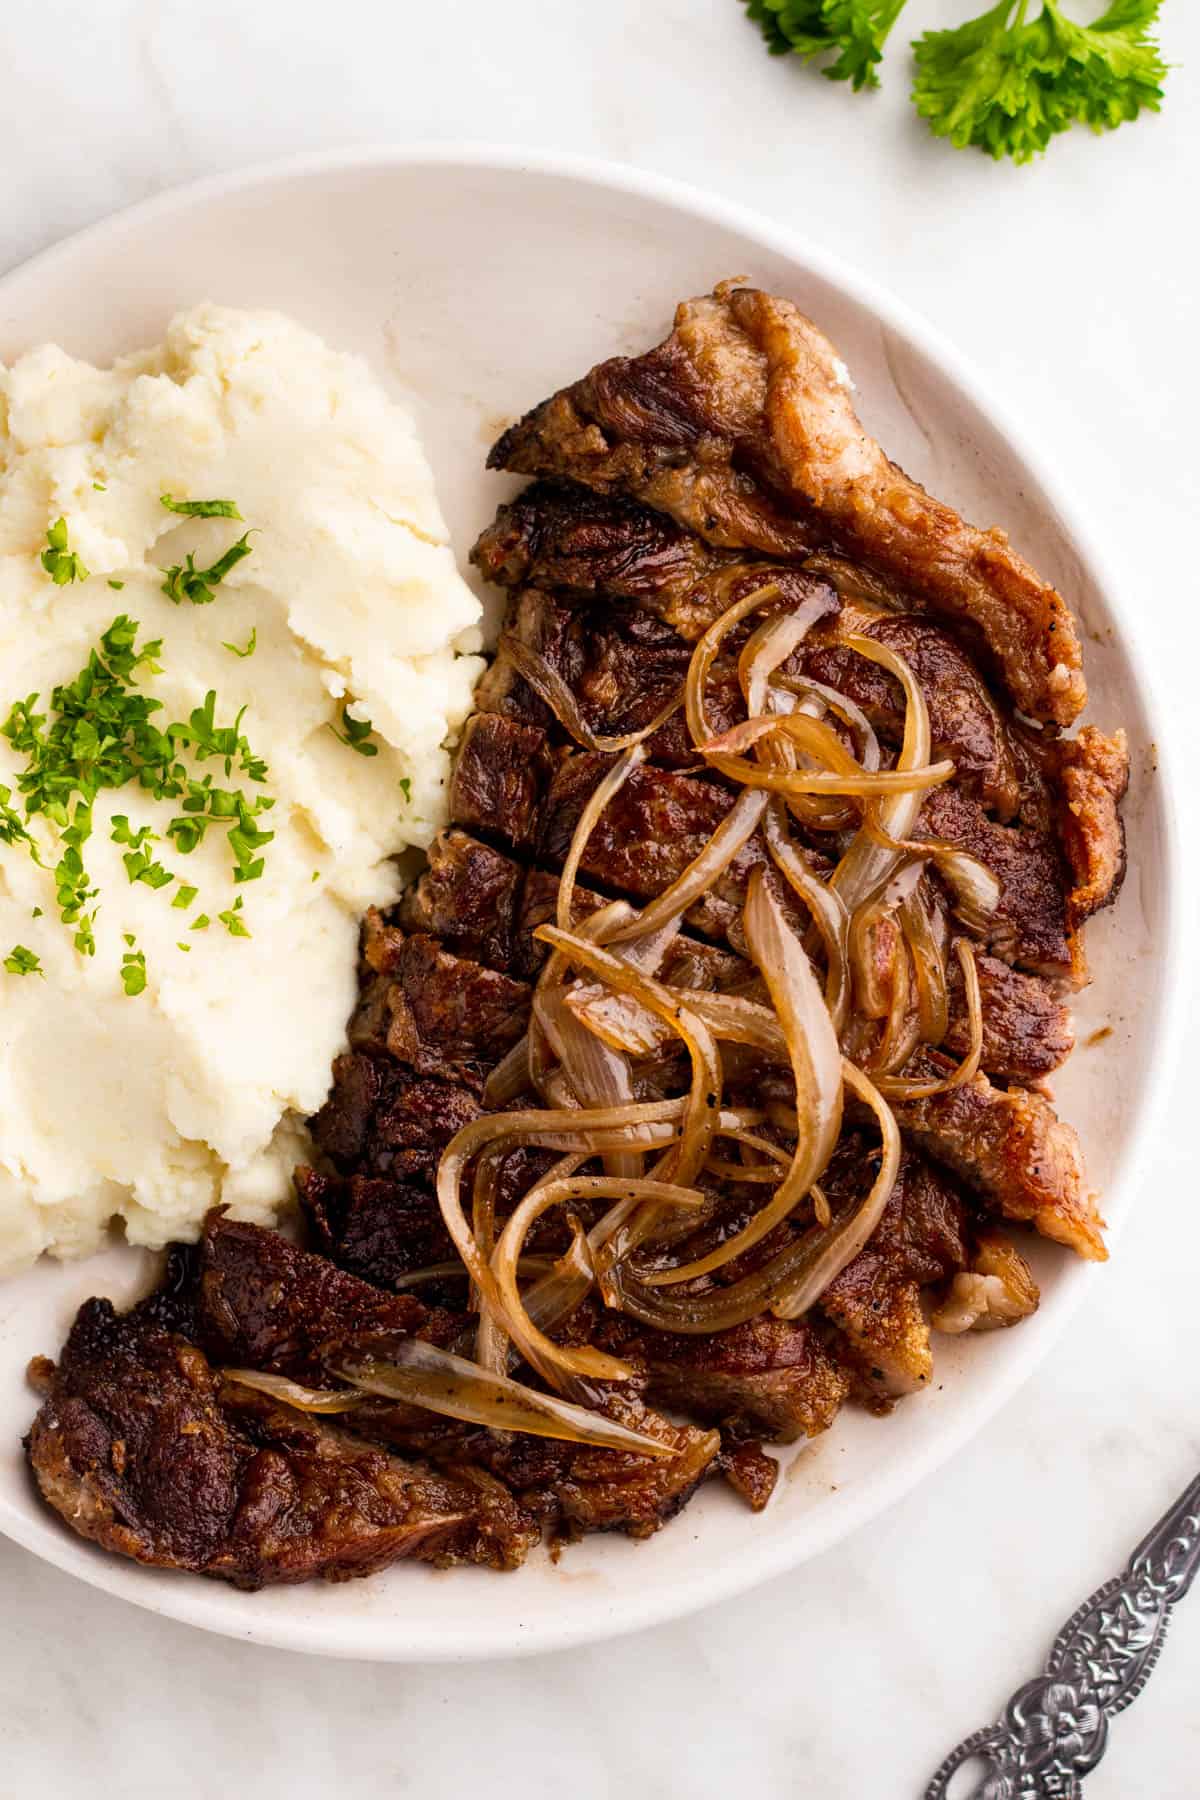 White plate with steak and mashed potatoes.